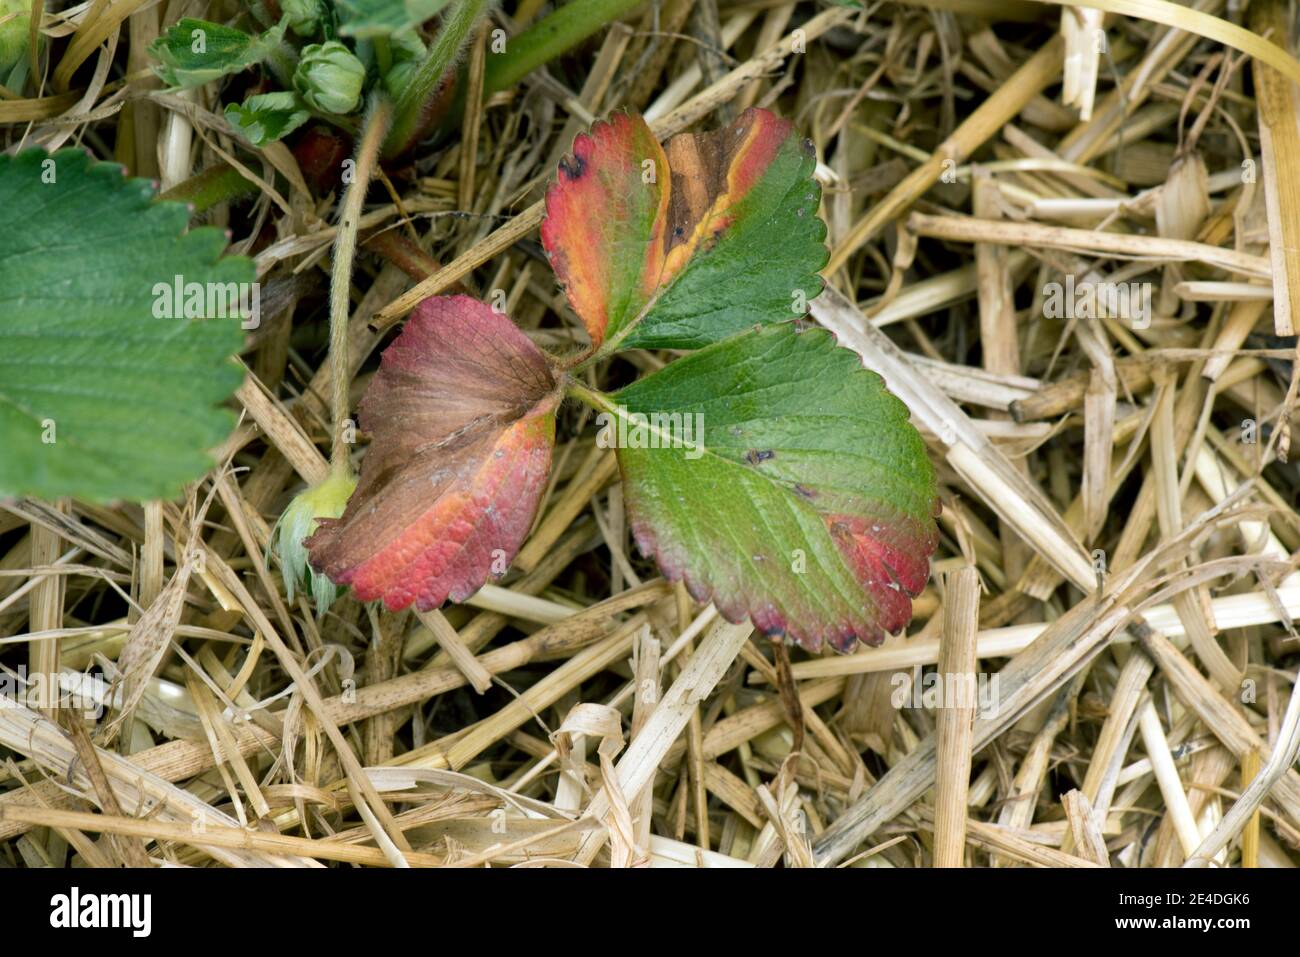 Leaf blight (Phomopsis obscurans) red and grey necrotic lesions on young strawberry leaves, Berkshire, May Stock Photo